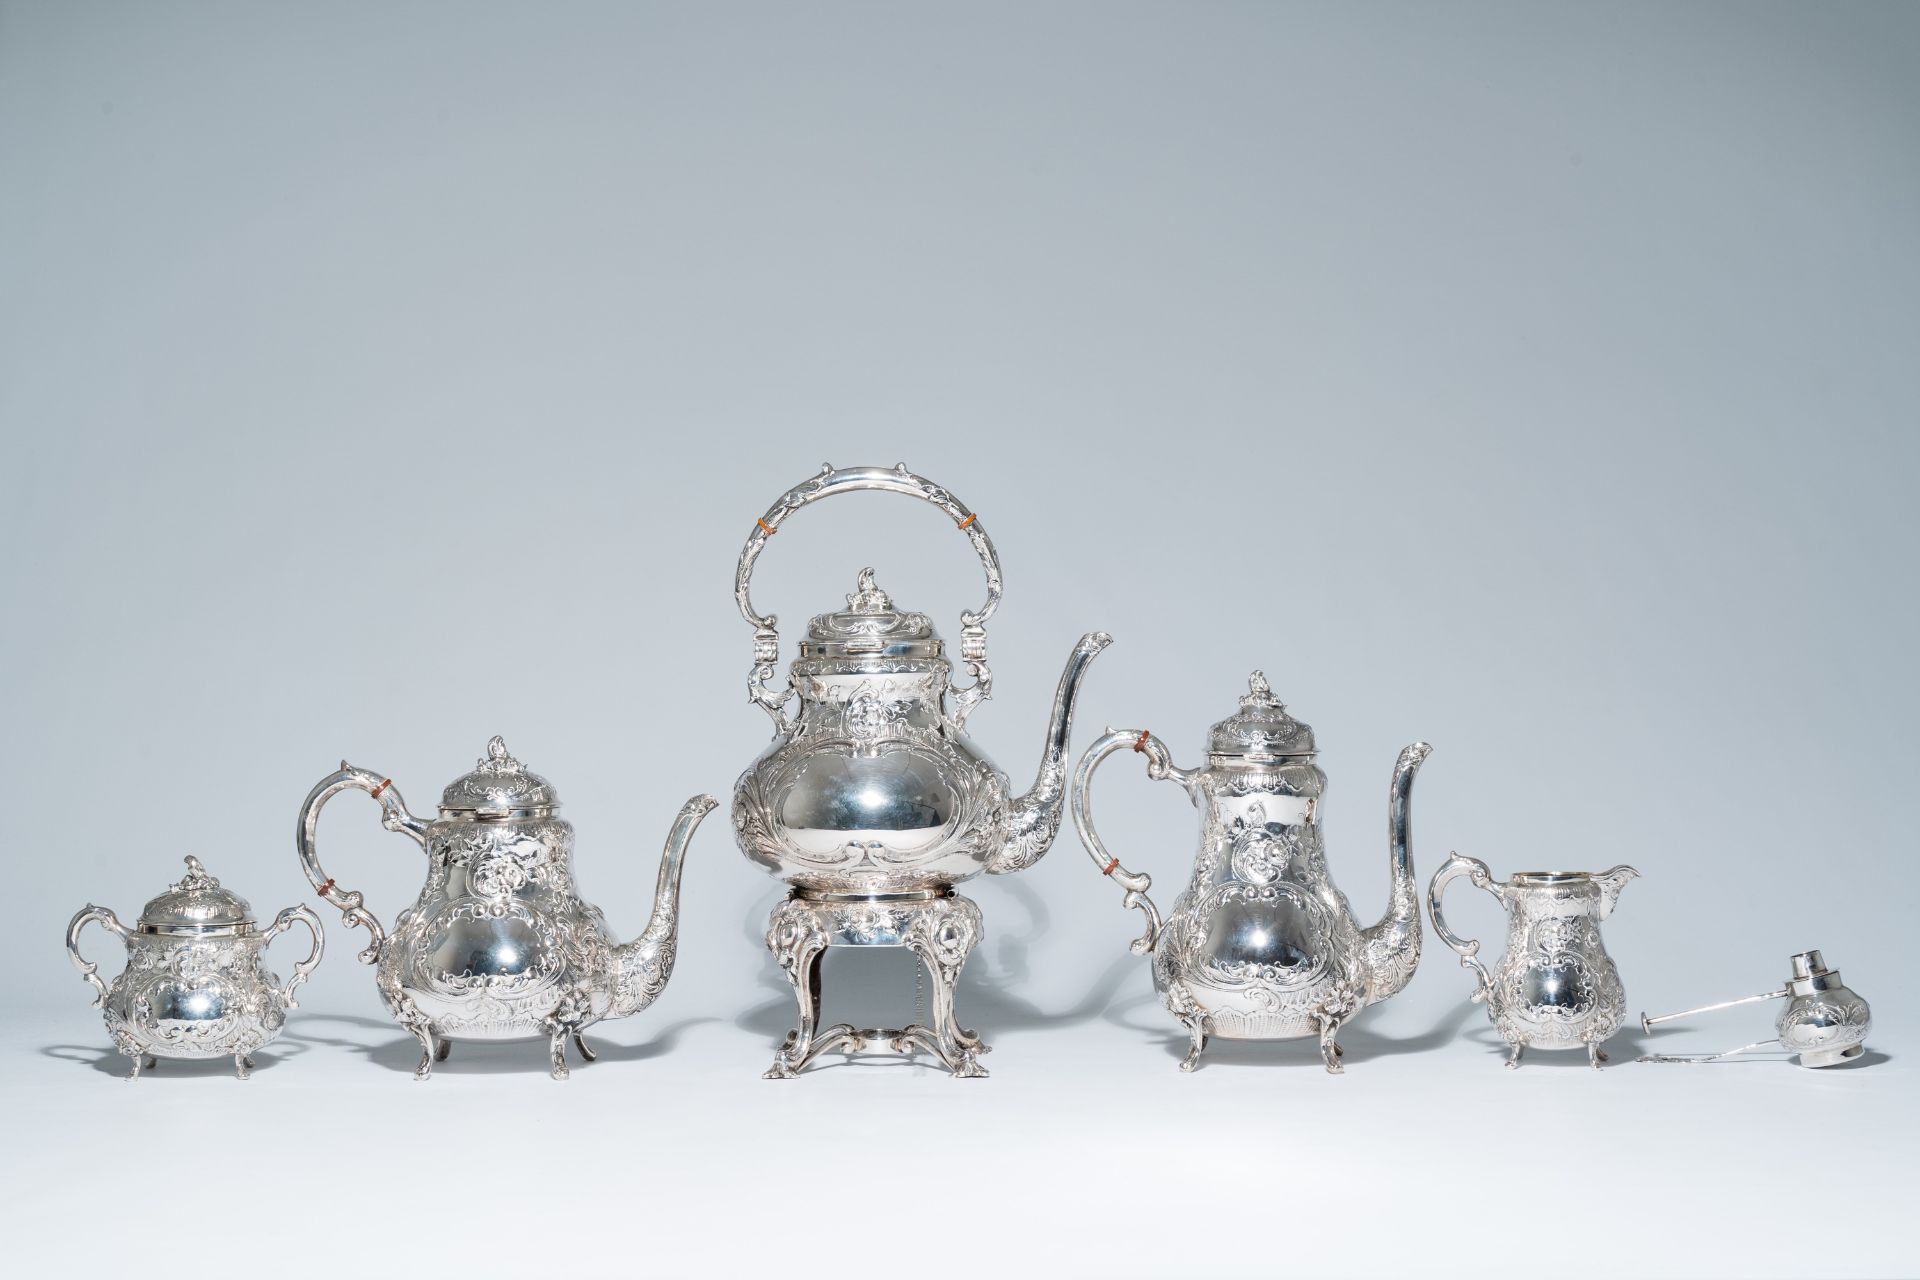 A five-piece German Rococo revival silver coffee and tea set with floral relief design, 800/000, mak - Image 3 of 20